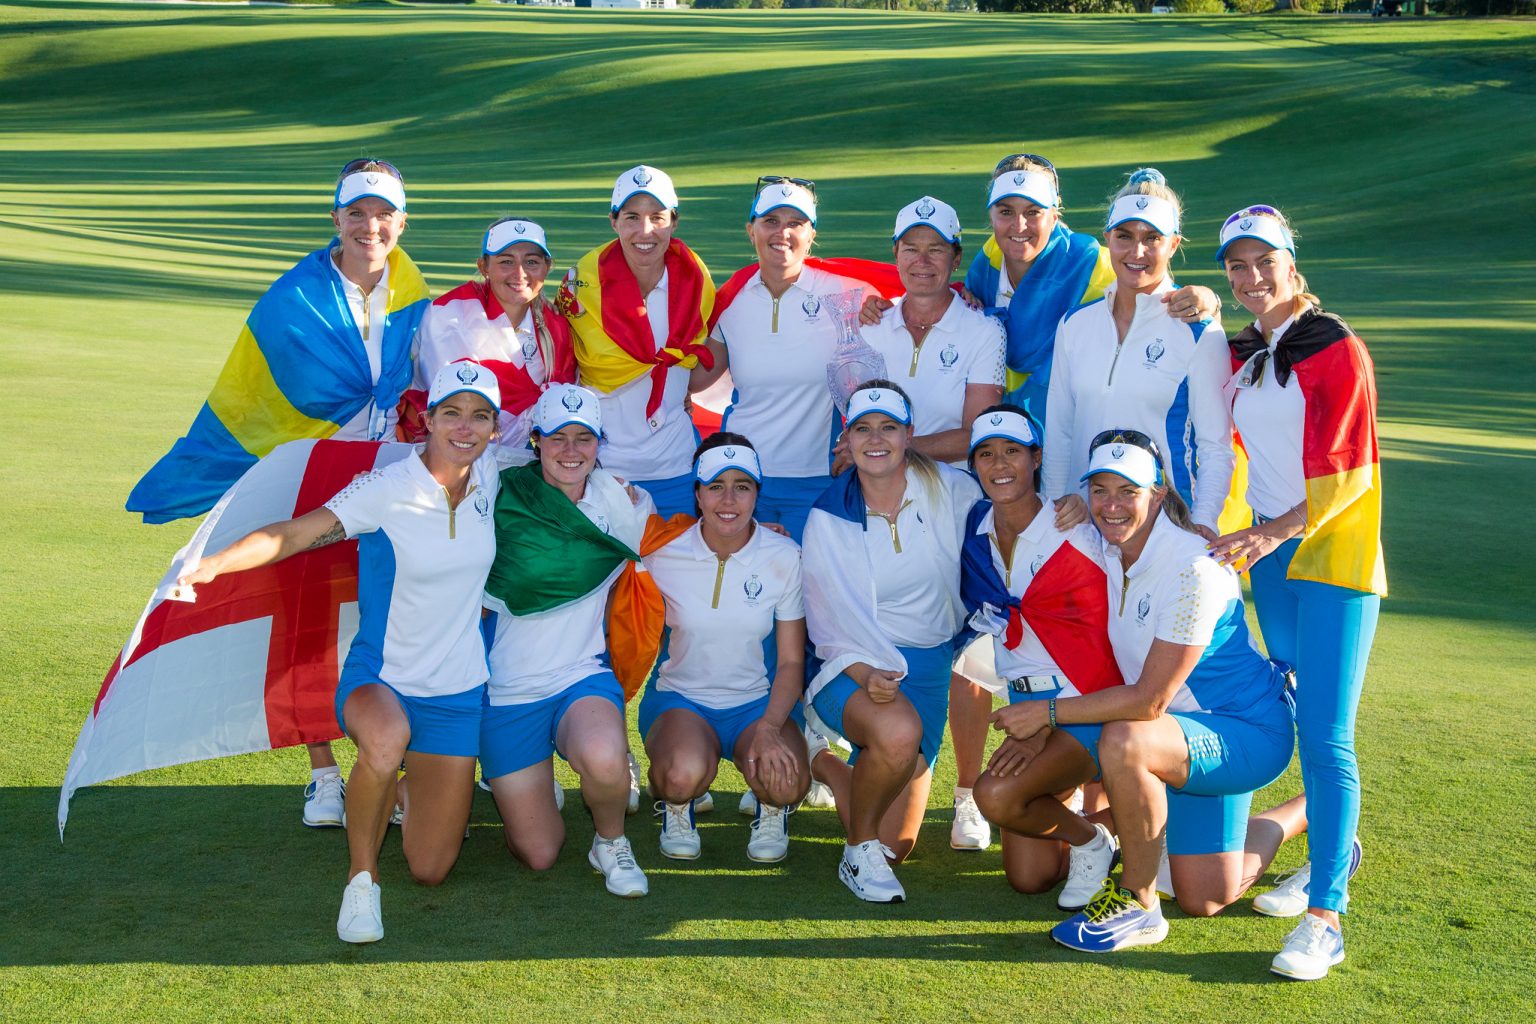 SKY SPORTS CELEBRATES 25 YEARS OF WOMEN’S GOLF WITH NEW LPGA & LET